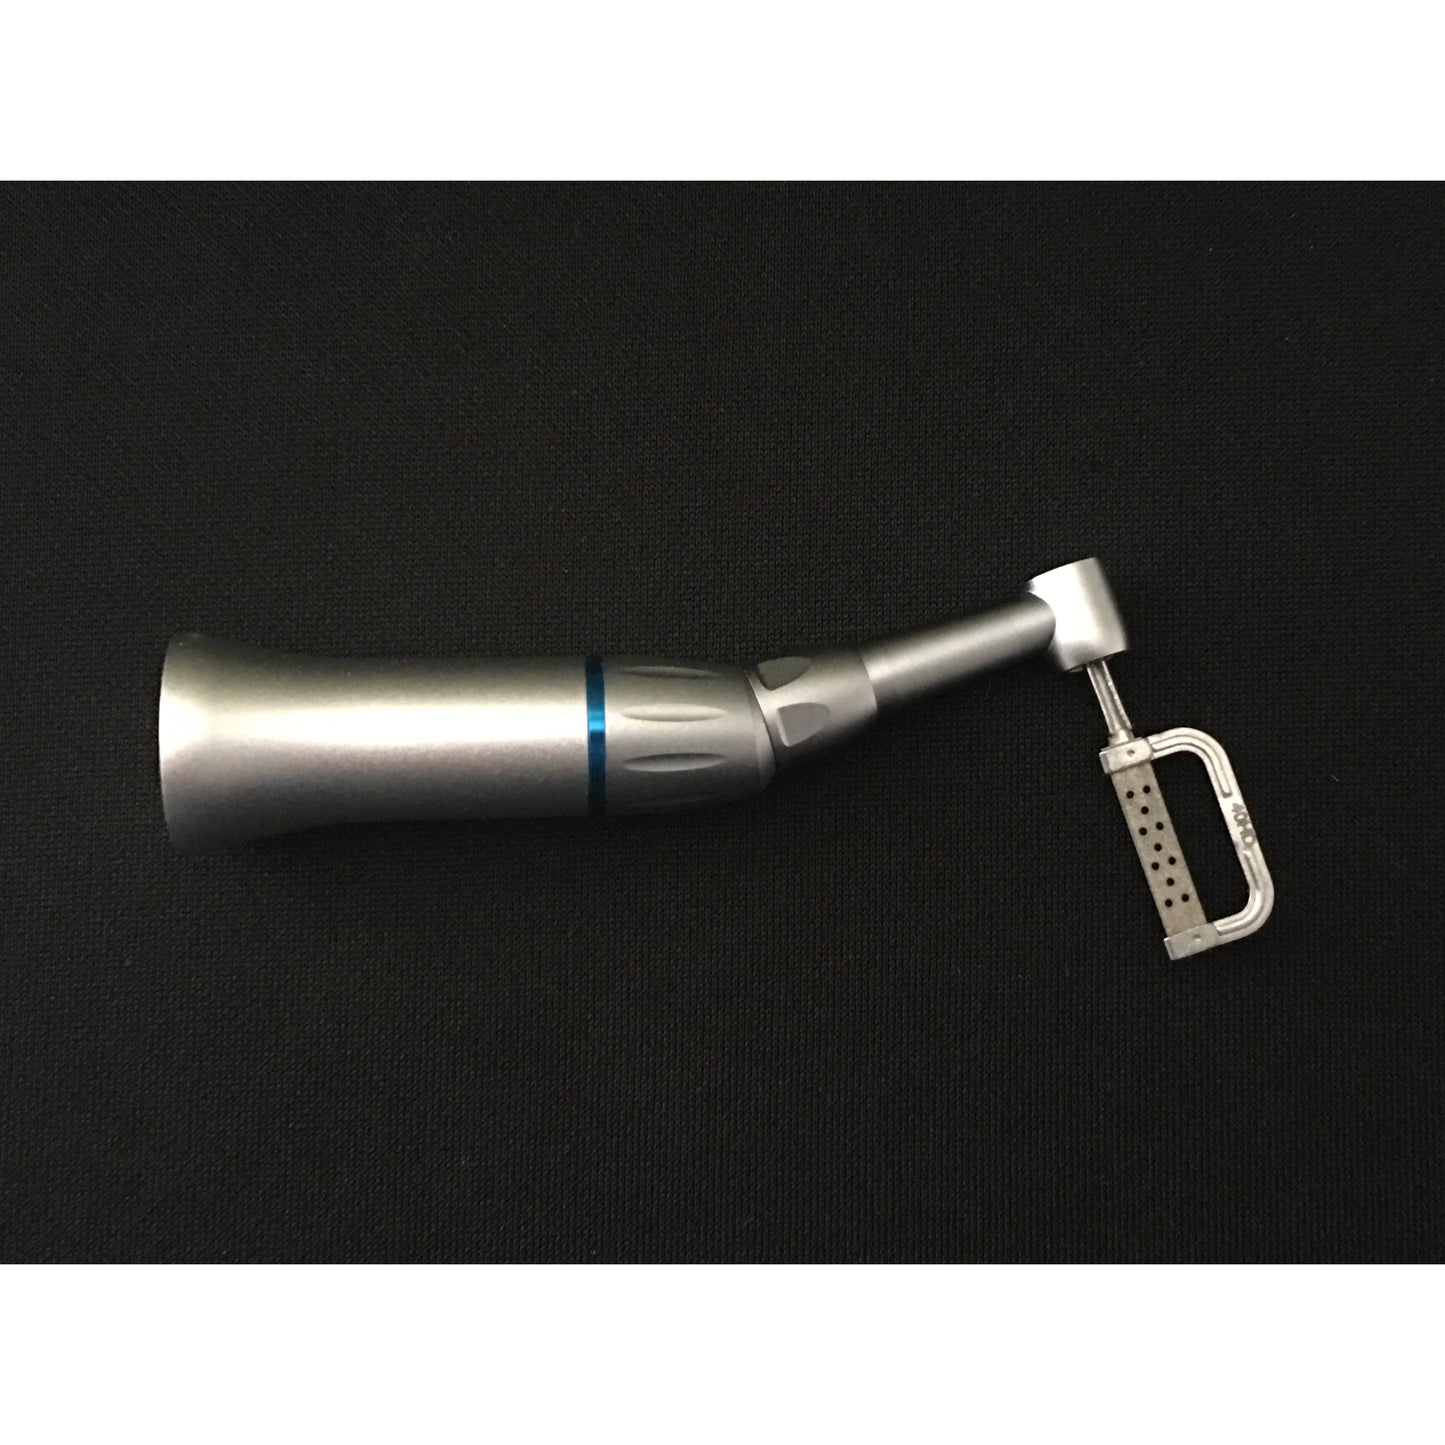 IPR Kit with Reciprocating Adapter